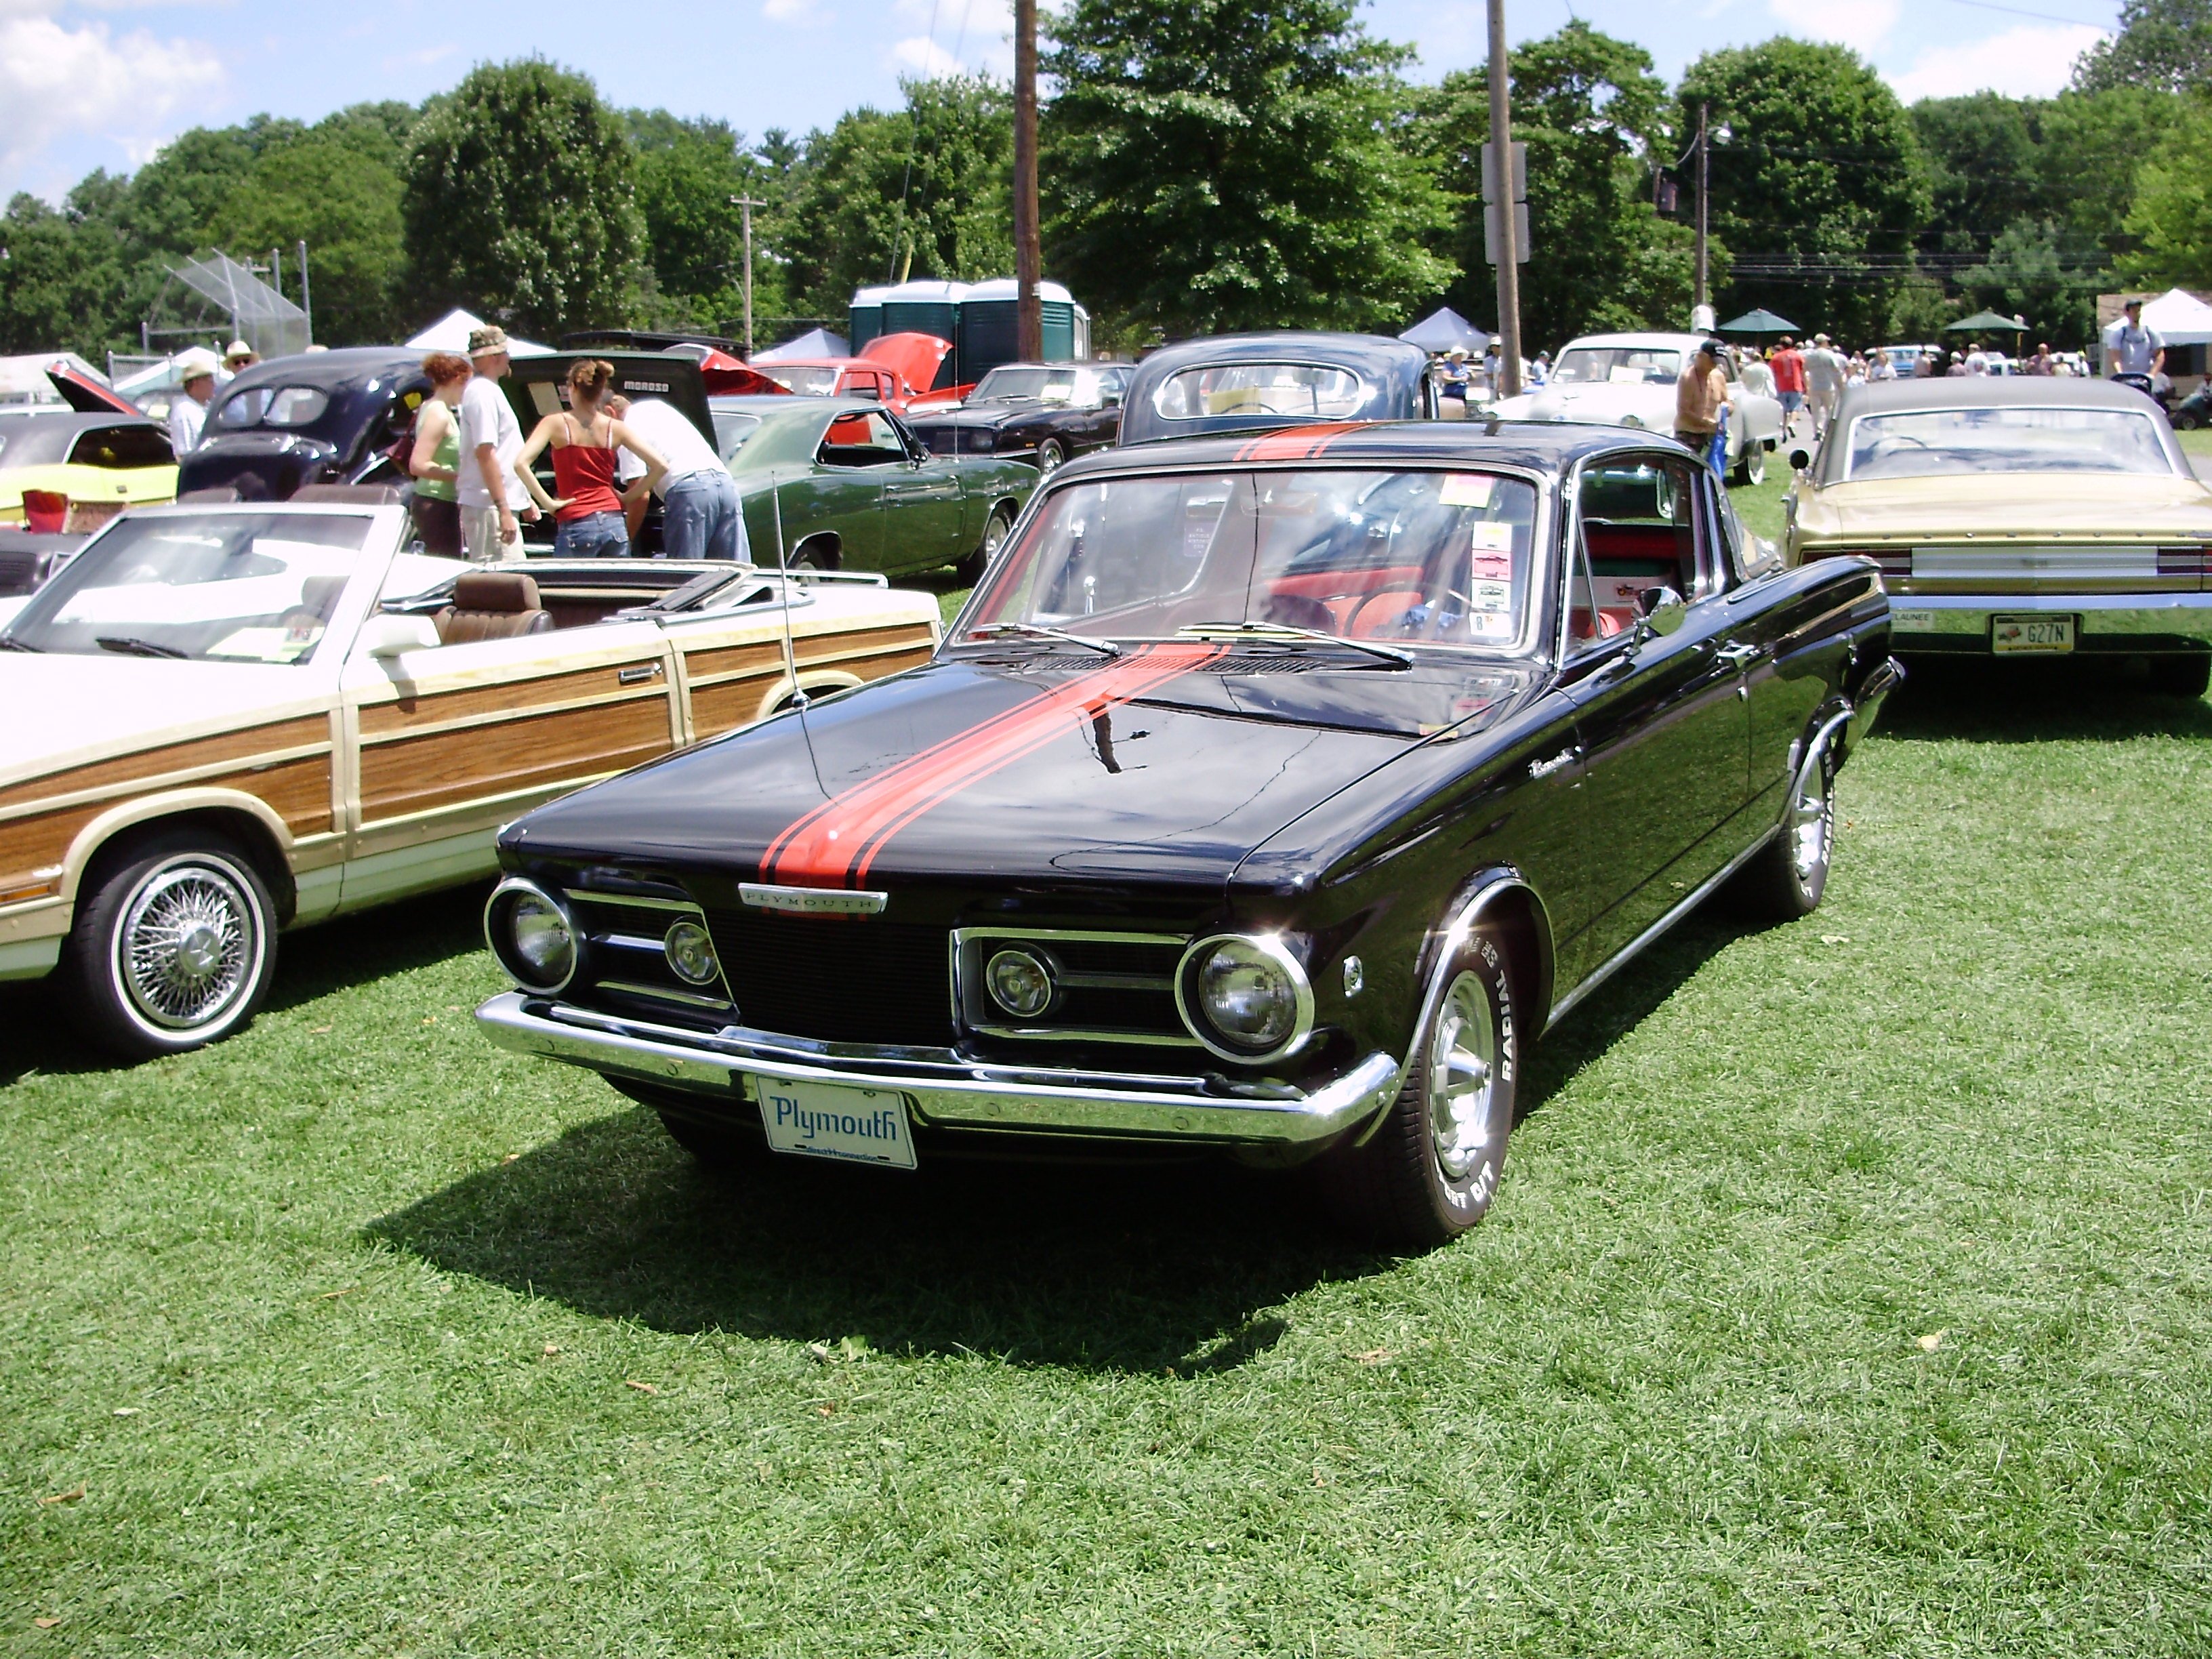 1965, Plymouth, Barracuda, Sport, Coupe, Muscle, Classic, Cuda